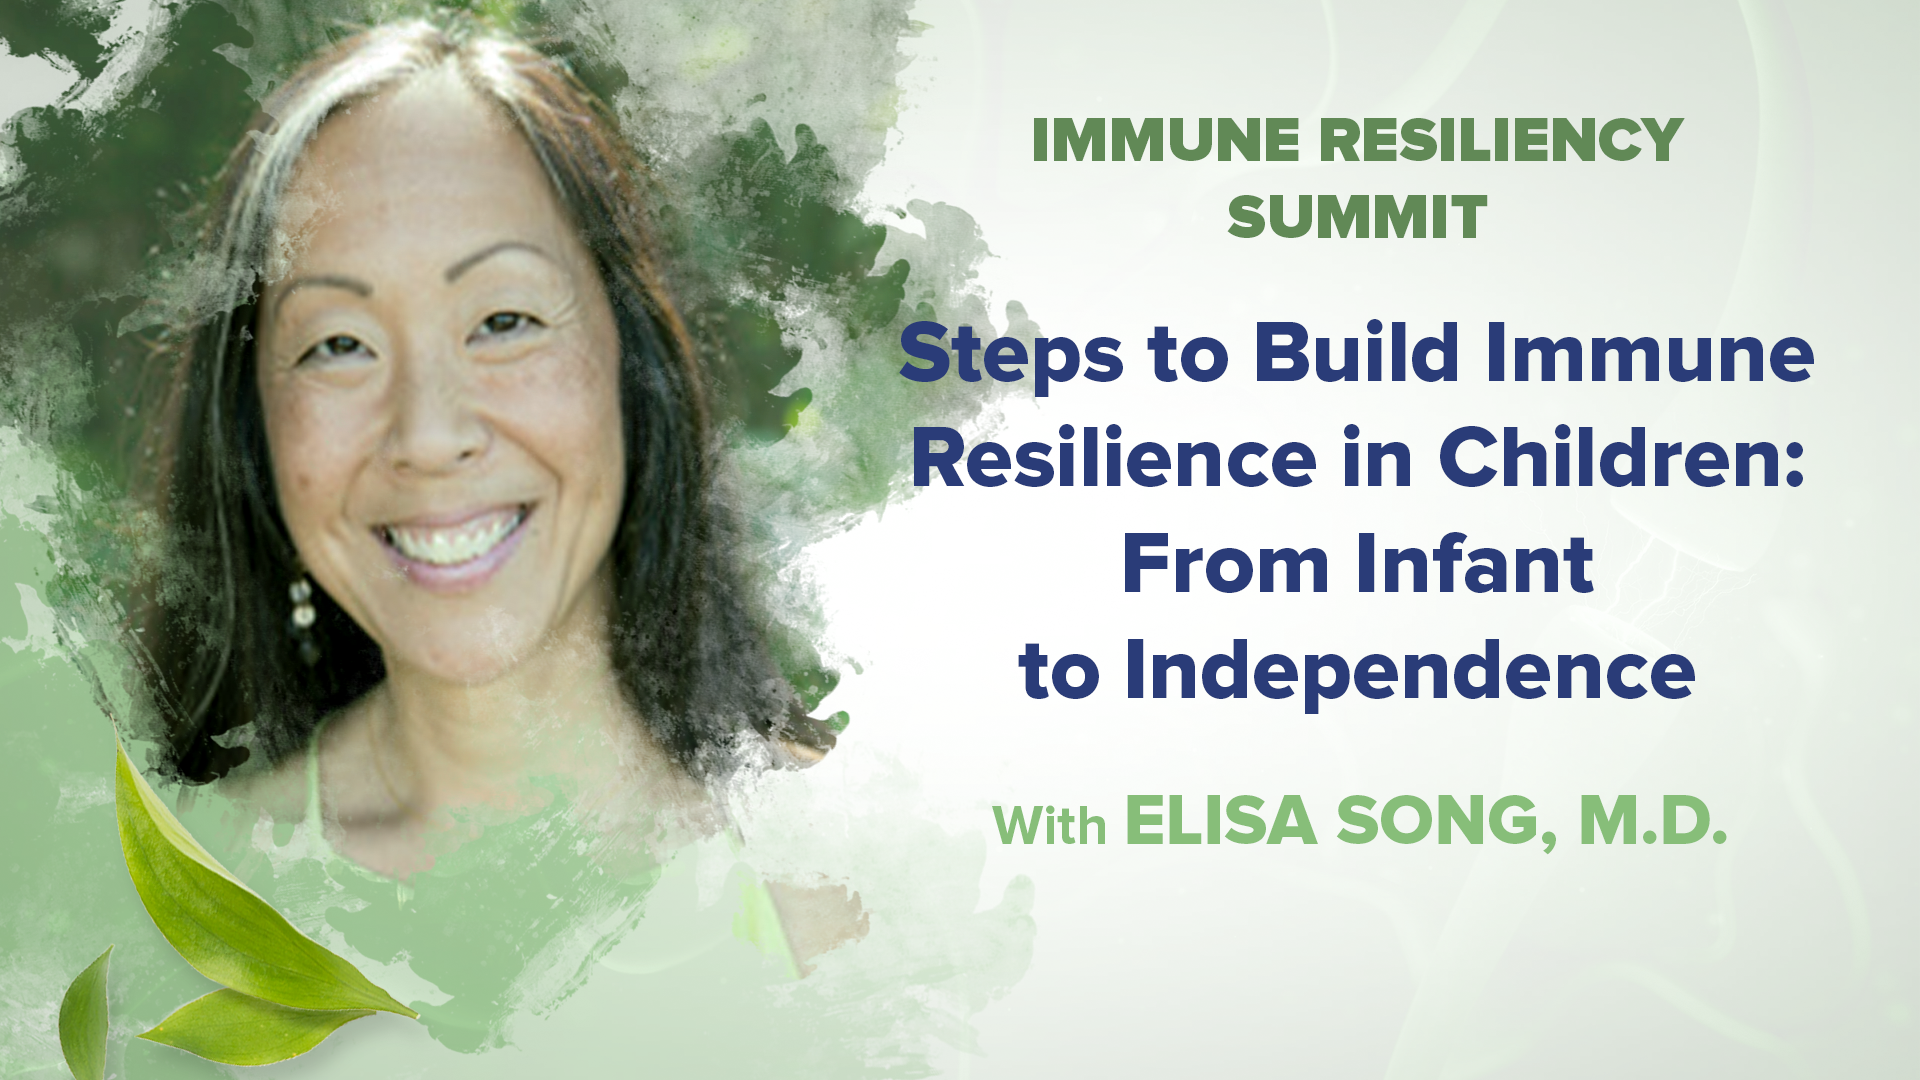 Steps to Build Immune Resilience in Children: From Infant to Independence